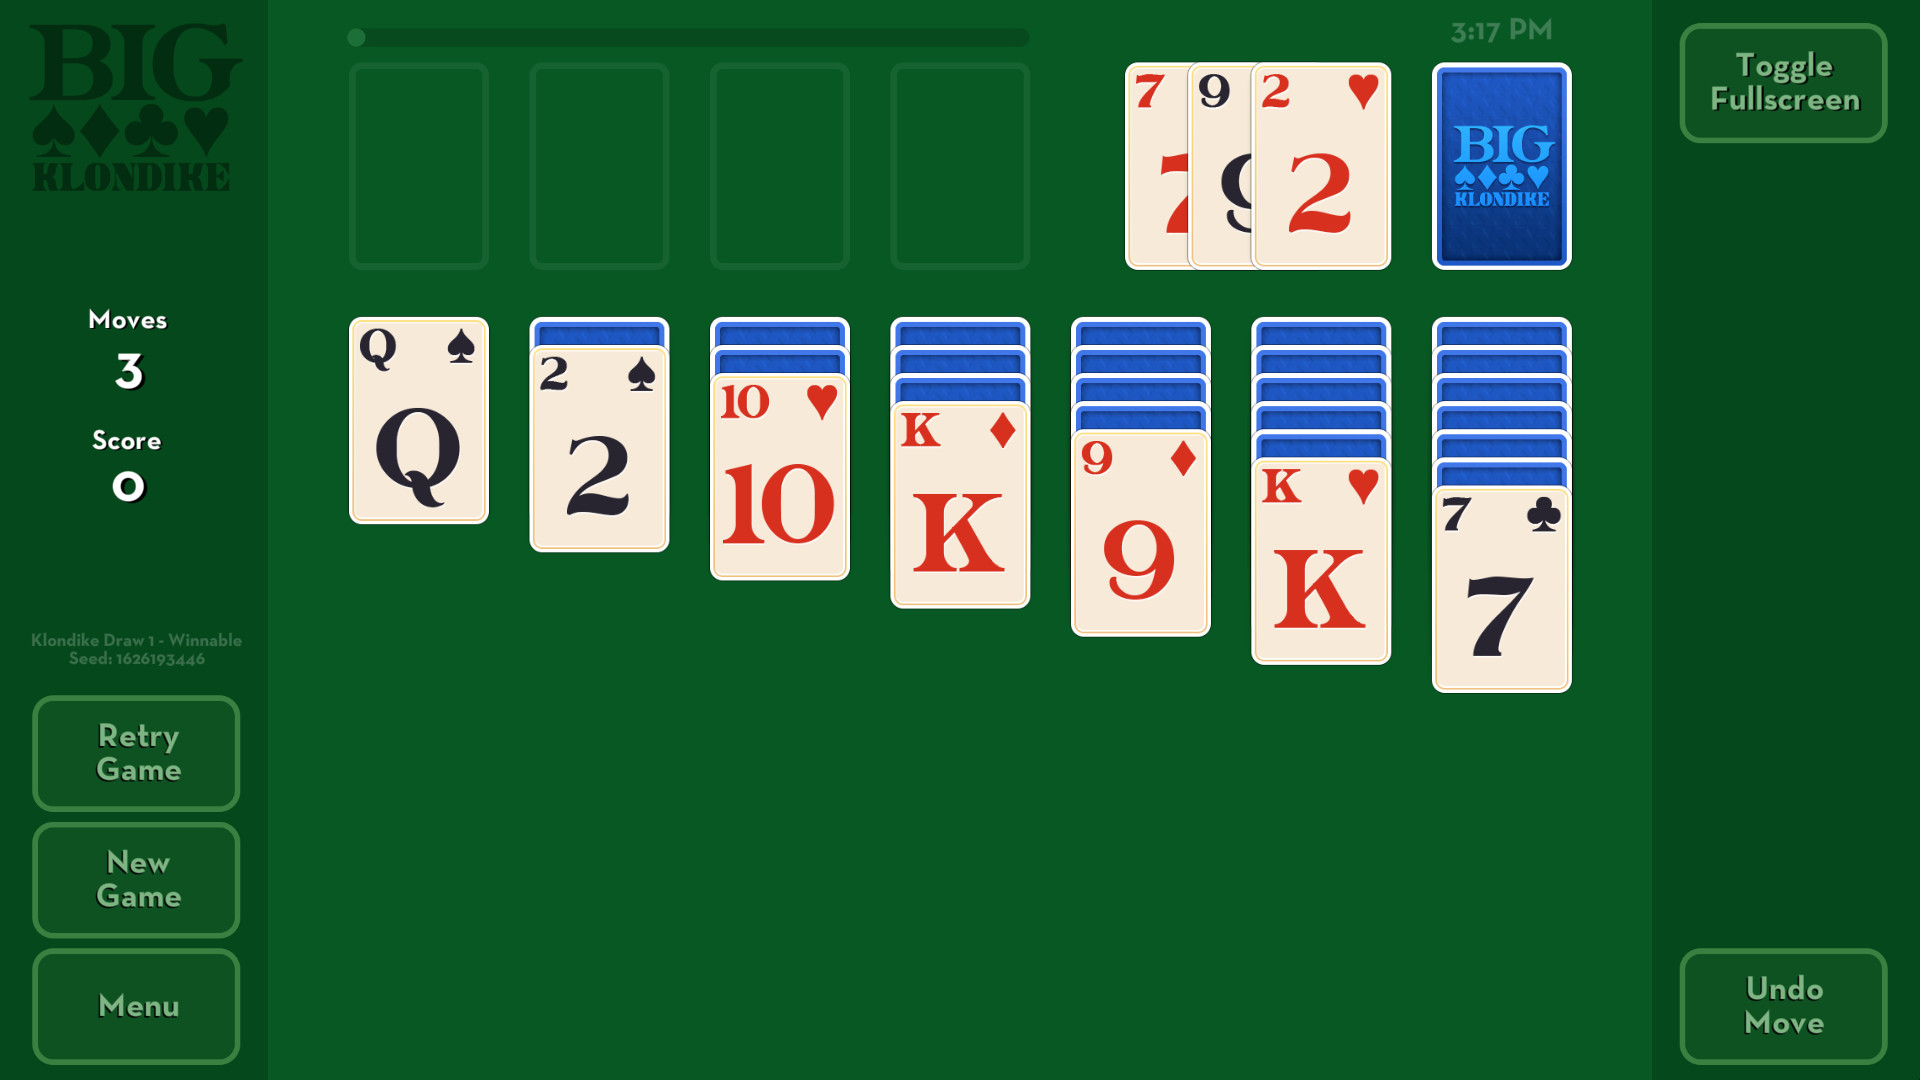 Giant Solitaire - Play Online